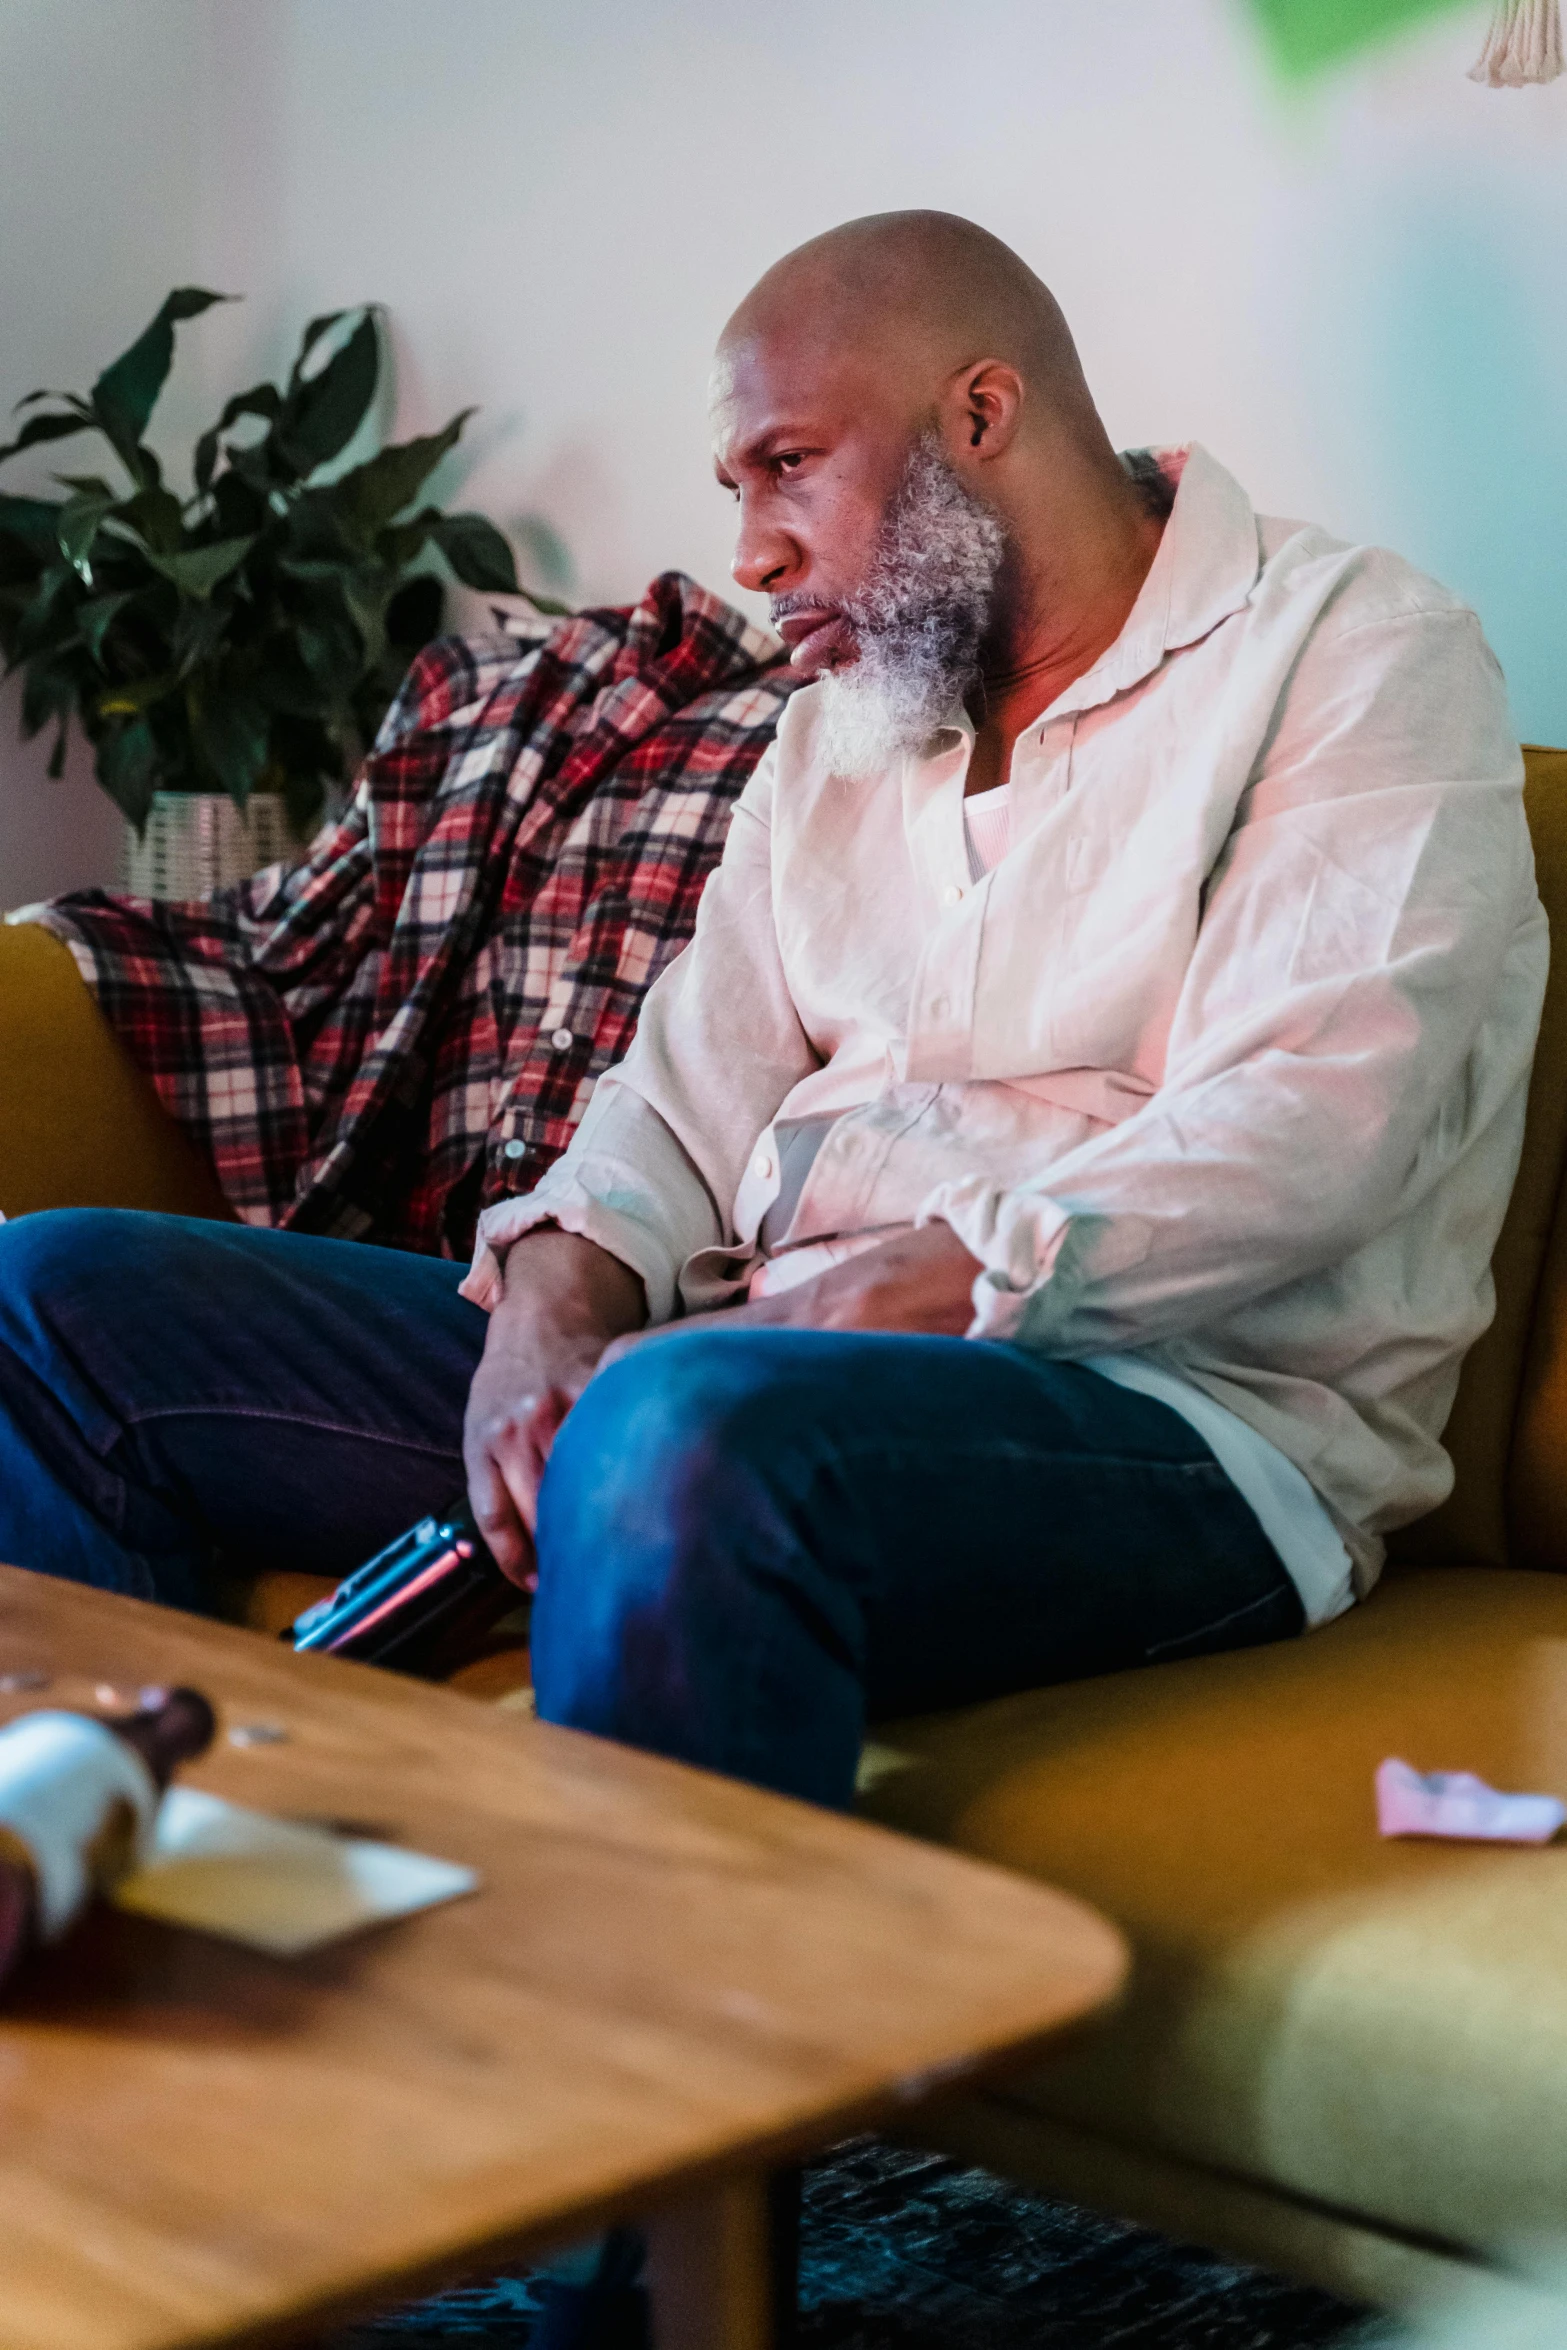 a man sitting on a couch in a living room, pexels, process art, concerned expression, riyahd cassiem, absent father, bald man